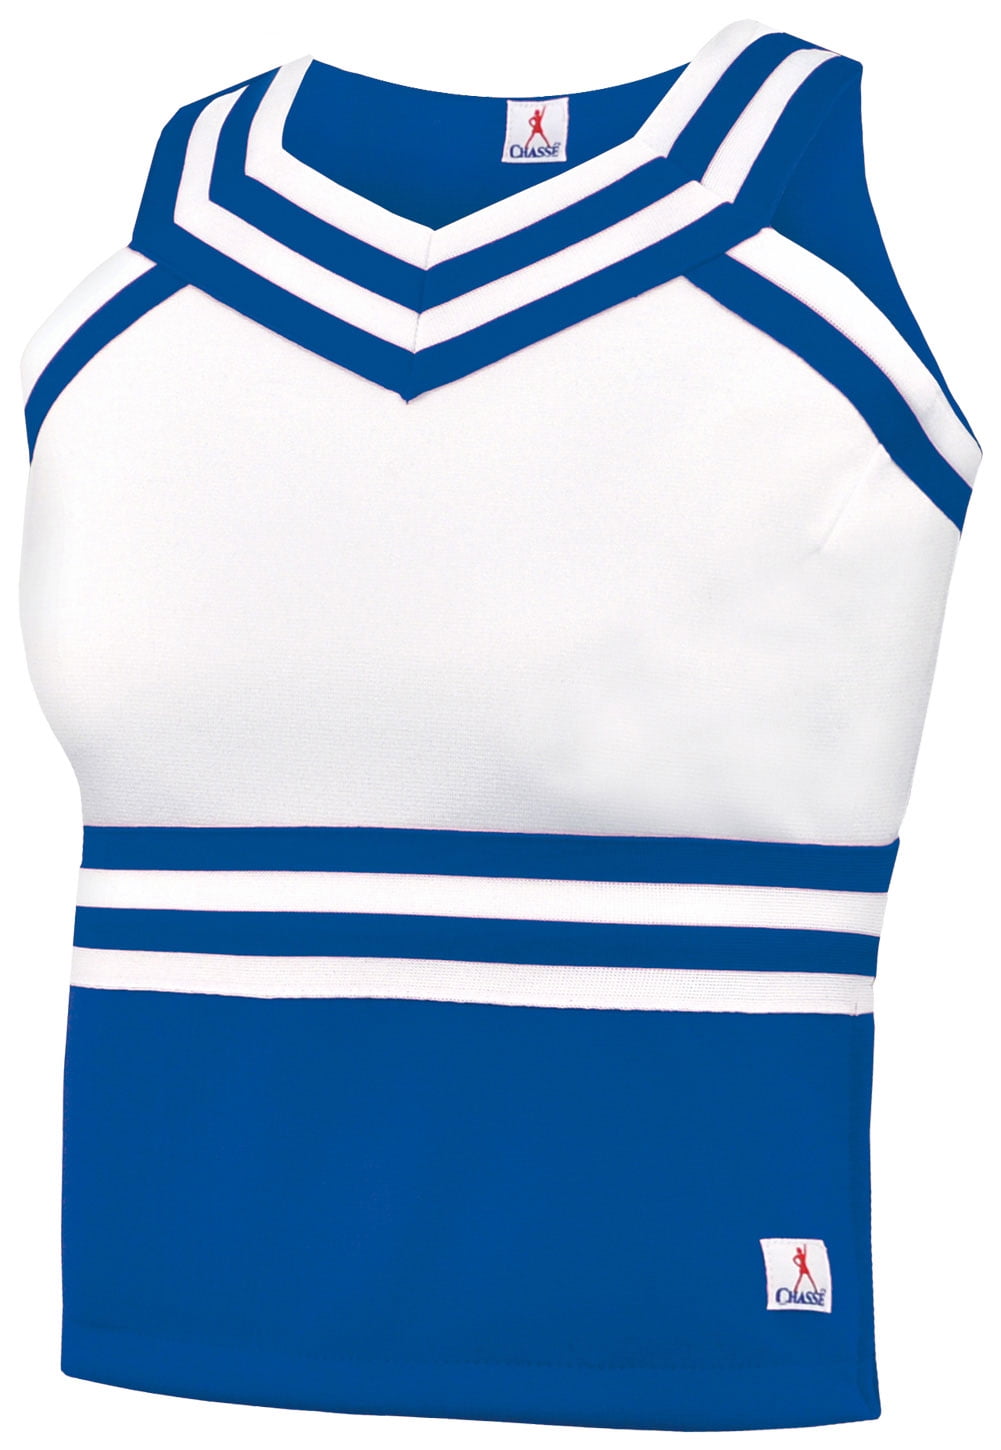 Chasse Sport Victory Shell Top - Cheer Uniforms